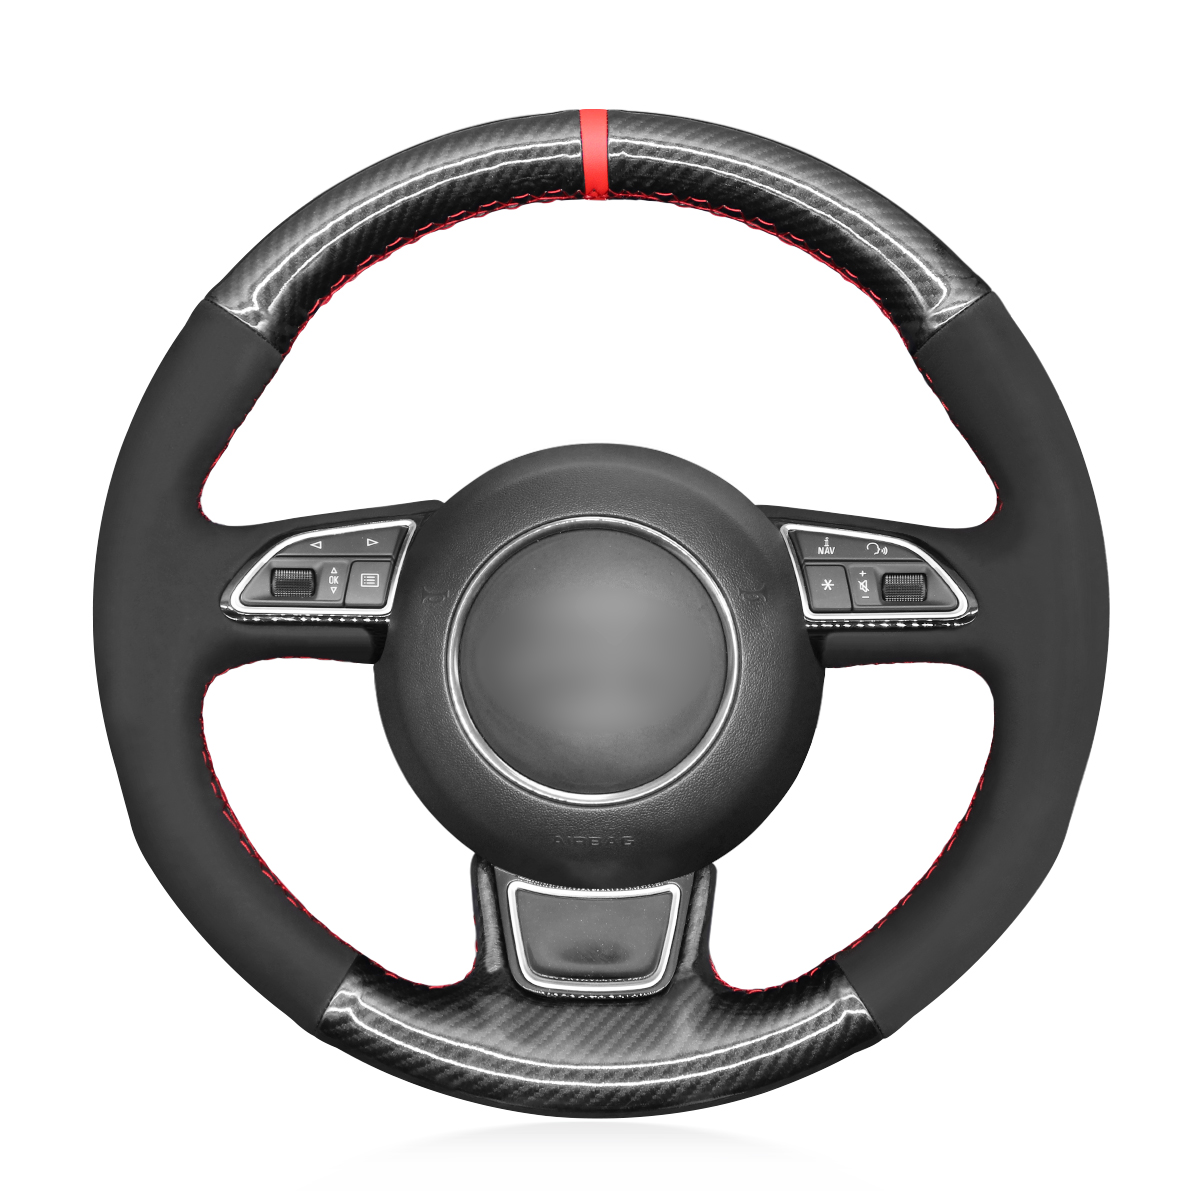 Sewing Black Suede Leather Steering Wheel Cover for Audi A1 A3 A5 A7